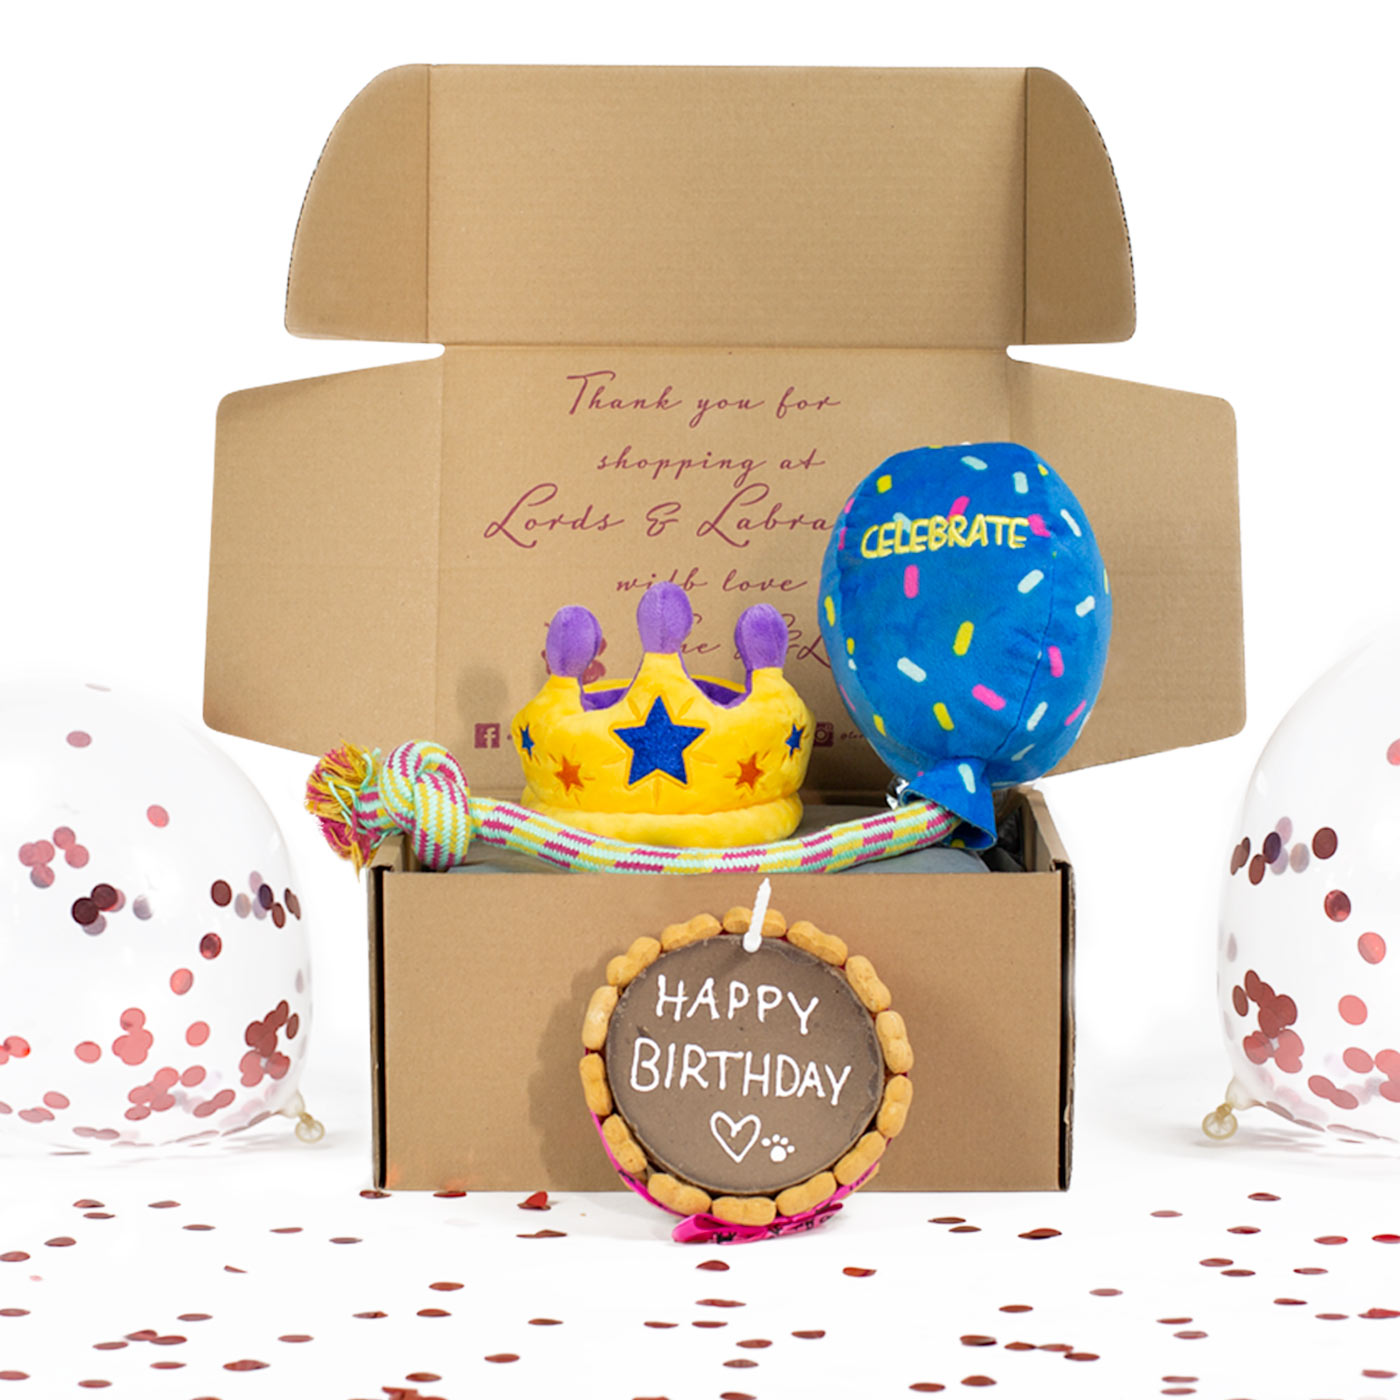 Wish your pooch ‘happy birthday’ with our luxury happy birthday gift box for dogs! Featuring a selection of dog treats and toys for the perfect birthday celebrations! Available now at Lords & Labradors    